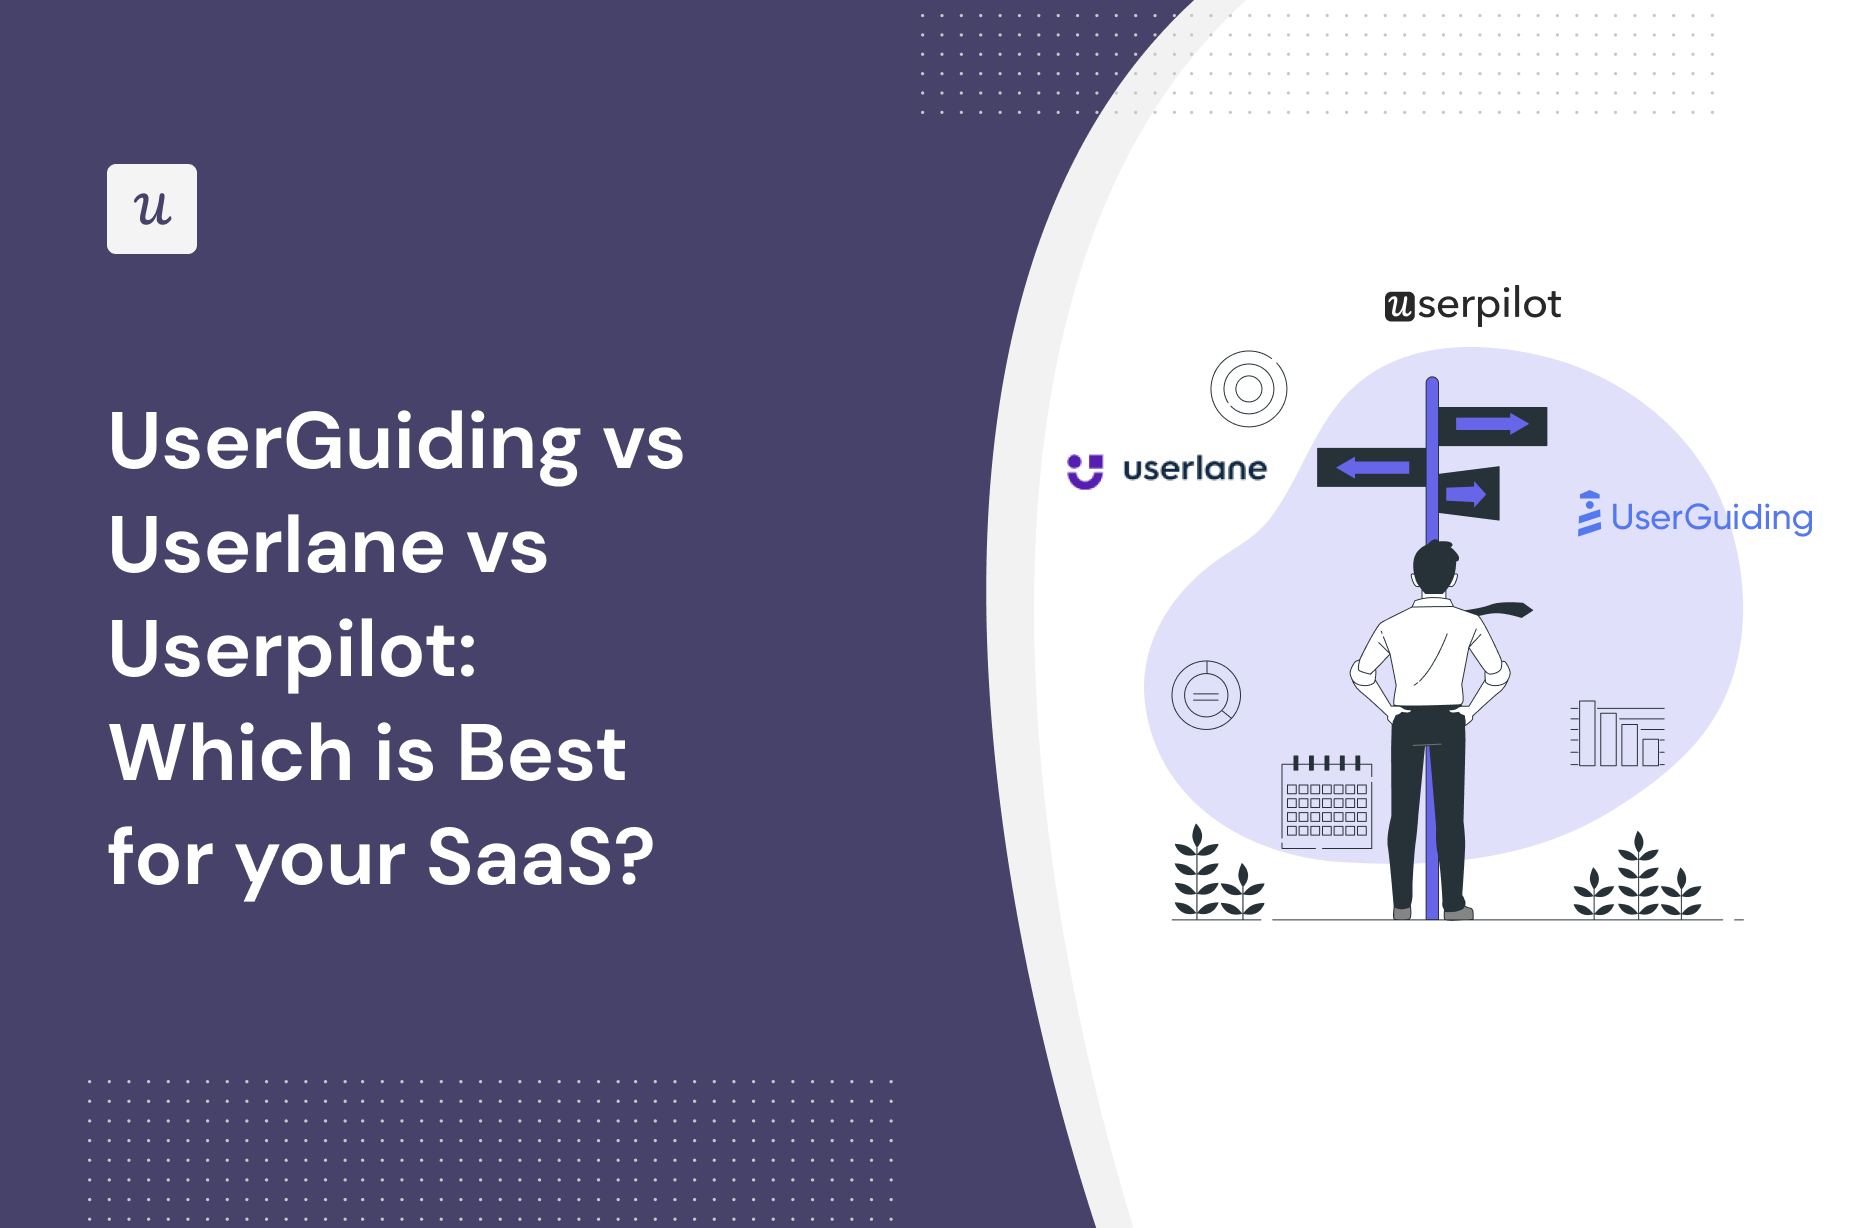 UserGuiding vs Userlane vs Userpilot: Which is Best for Your SaaS?